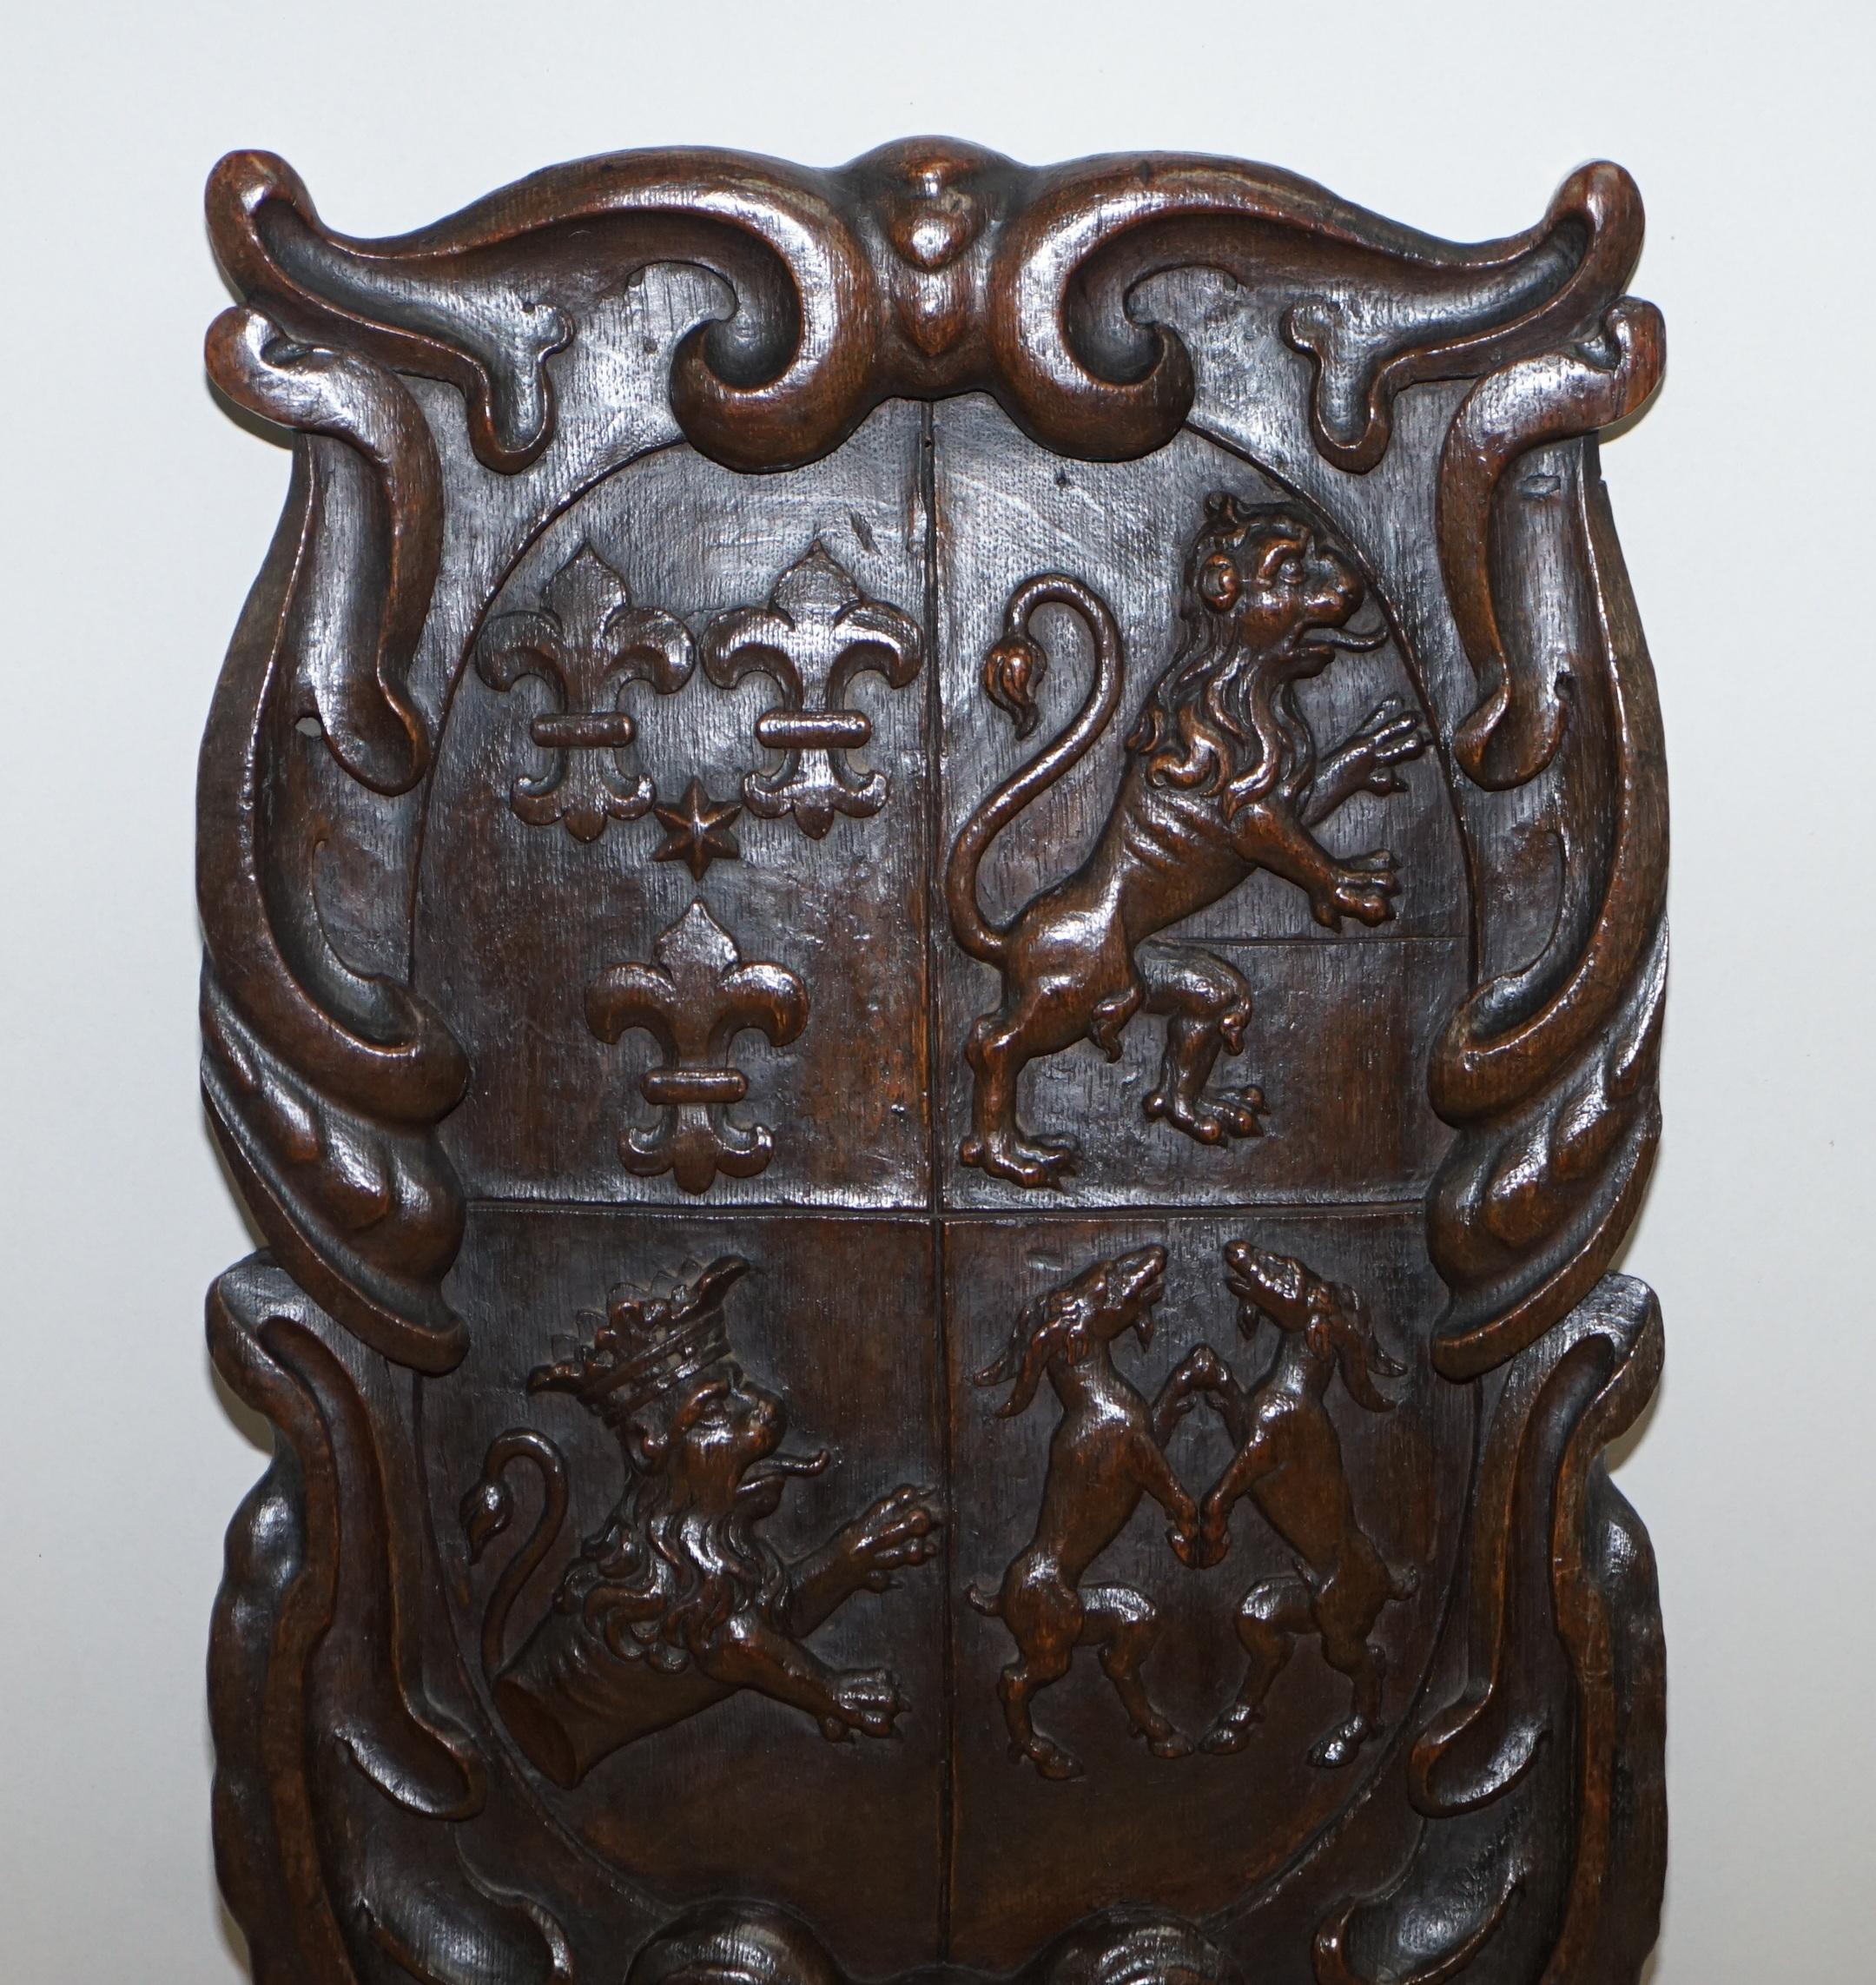 Charles II Rare Hand Carved Royal Coat of Arms 1660 Armorial Crest Solid Oak Stunning Find